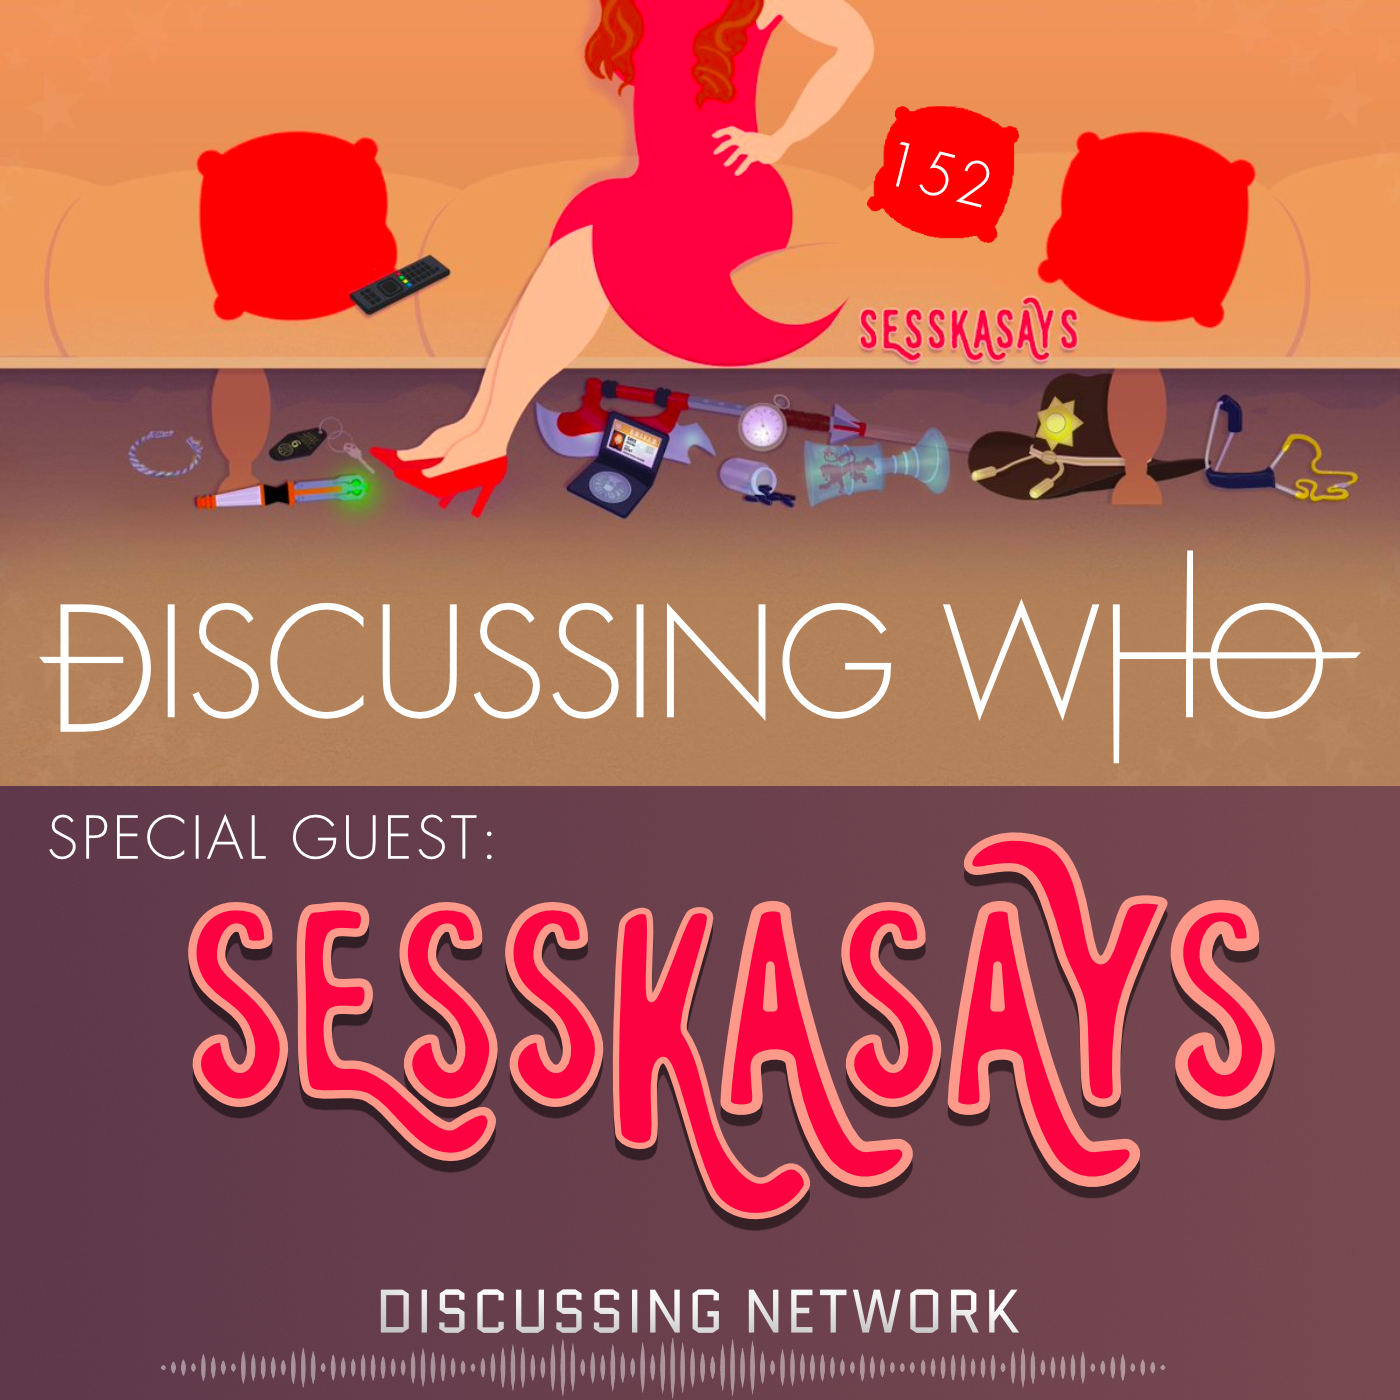 SesskaSays Returns to Discussing Who